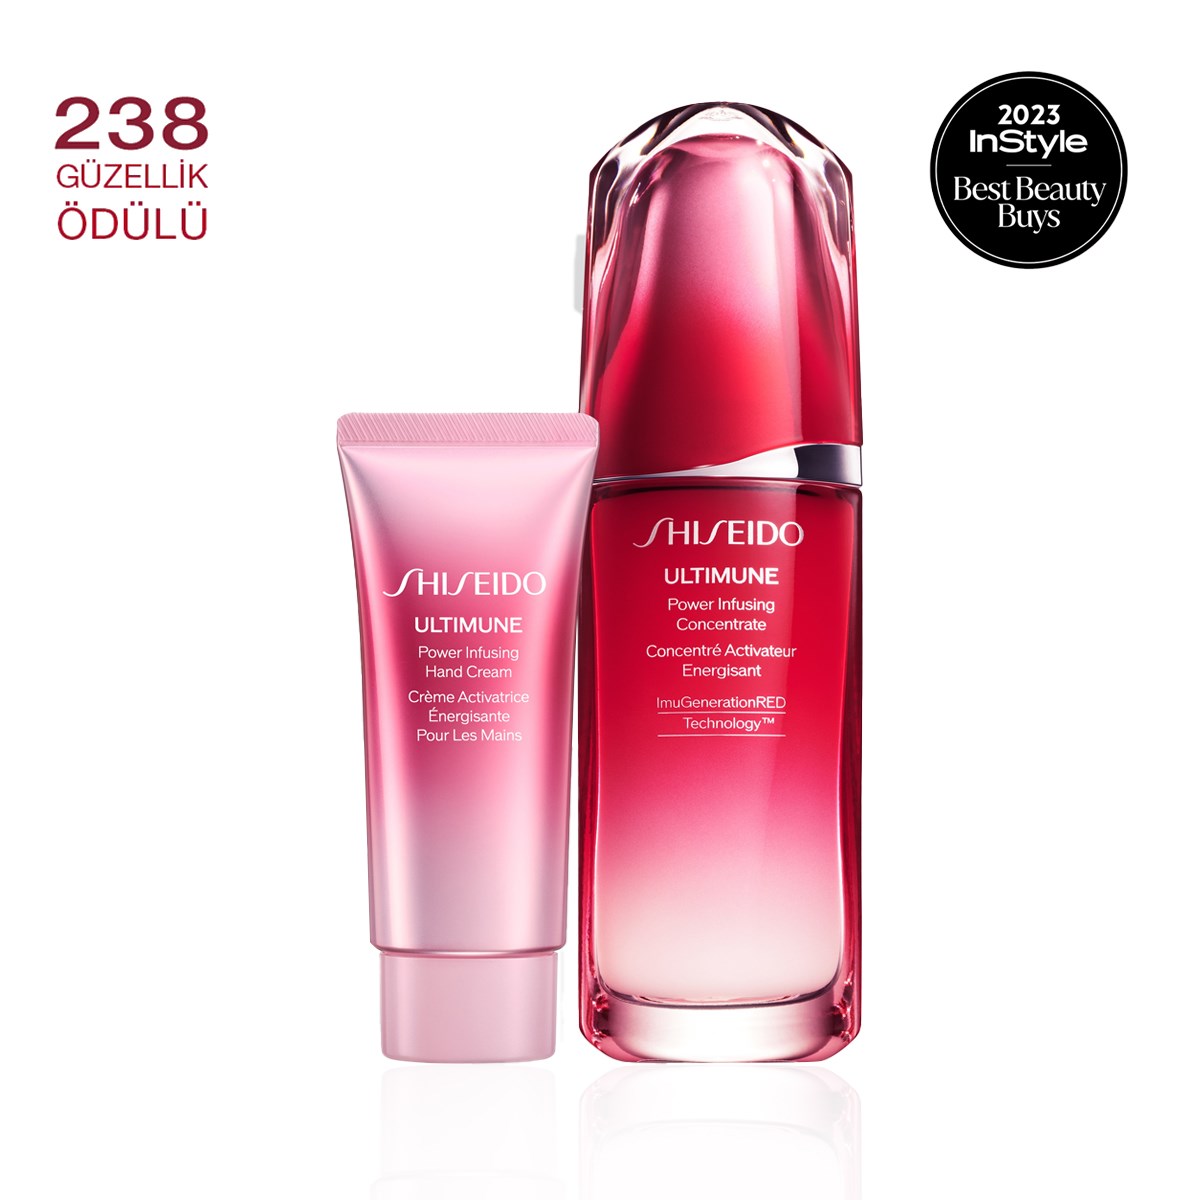 ULTIMUNE DUO FOR HANDS & FACE SET